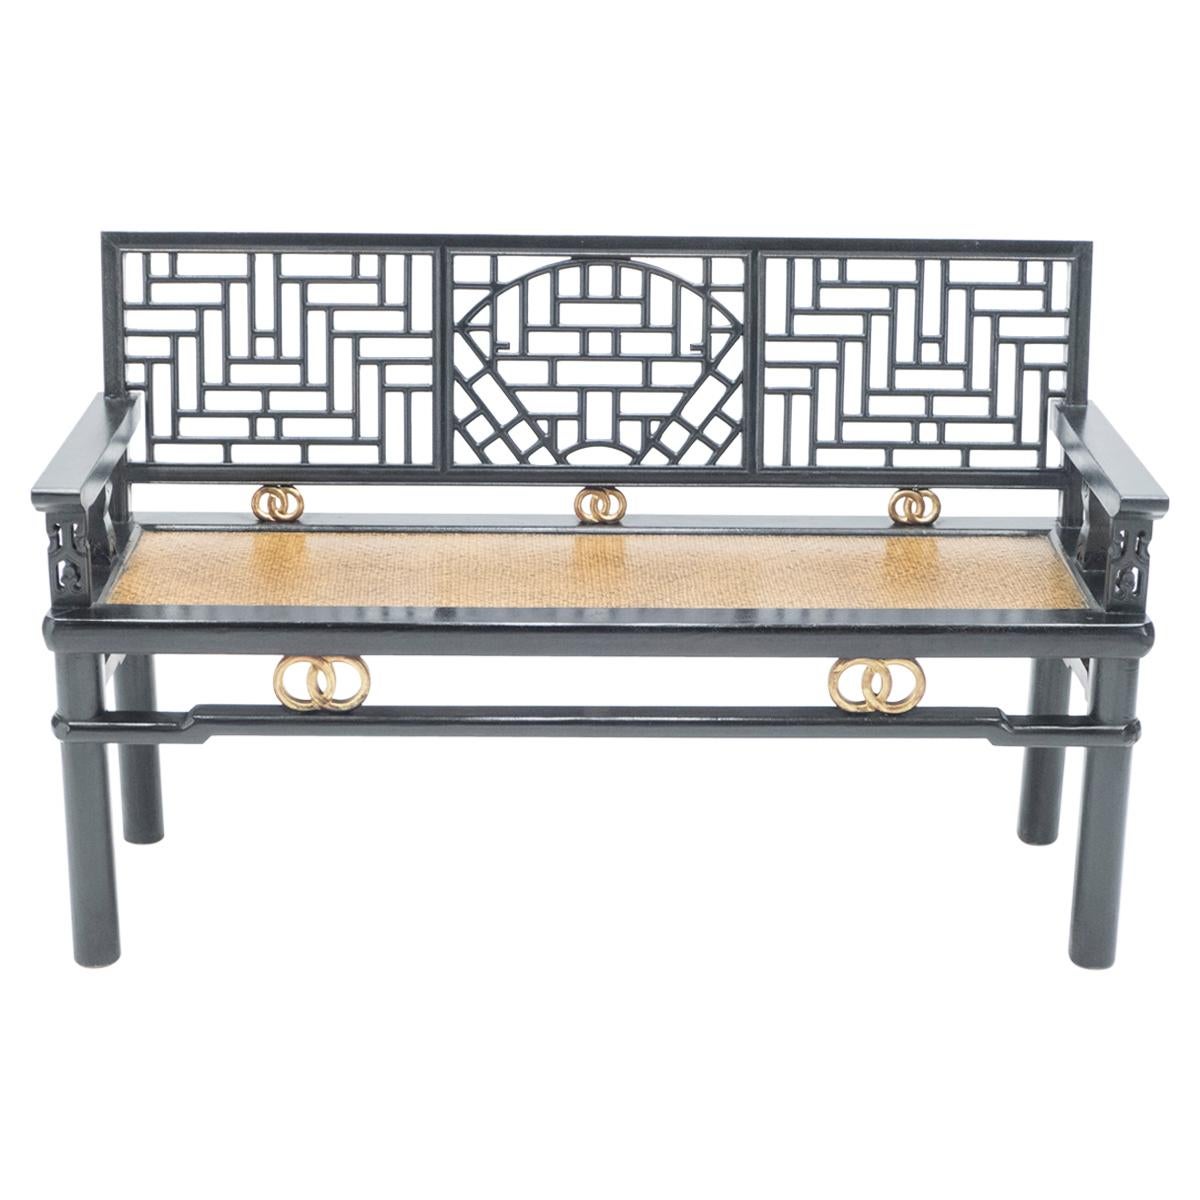 Early 20th Century Chinese Black Lacquered Bench Woven Seat